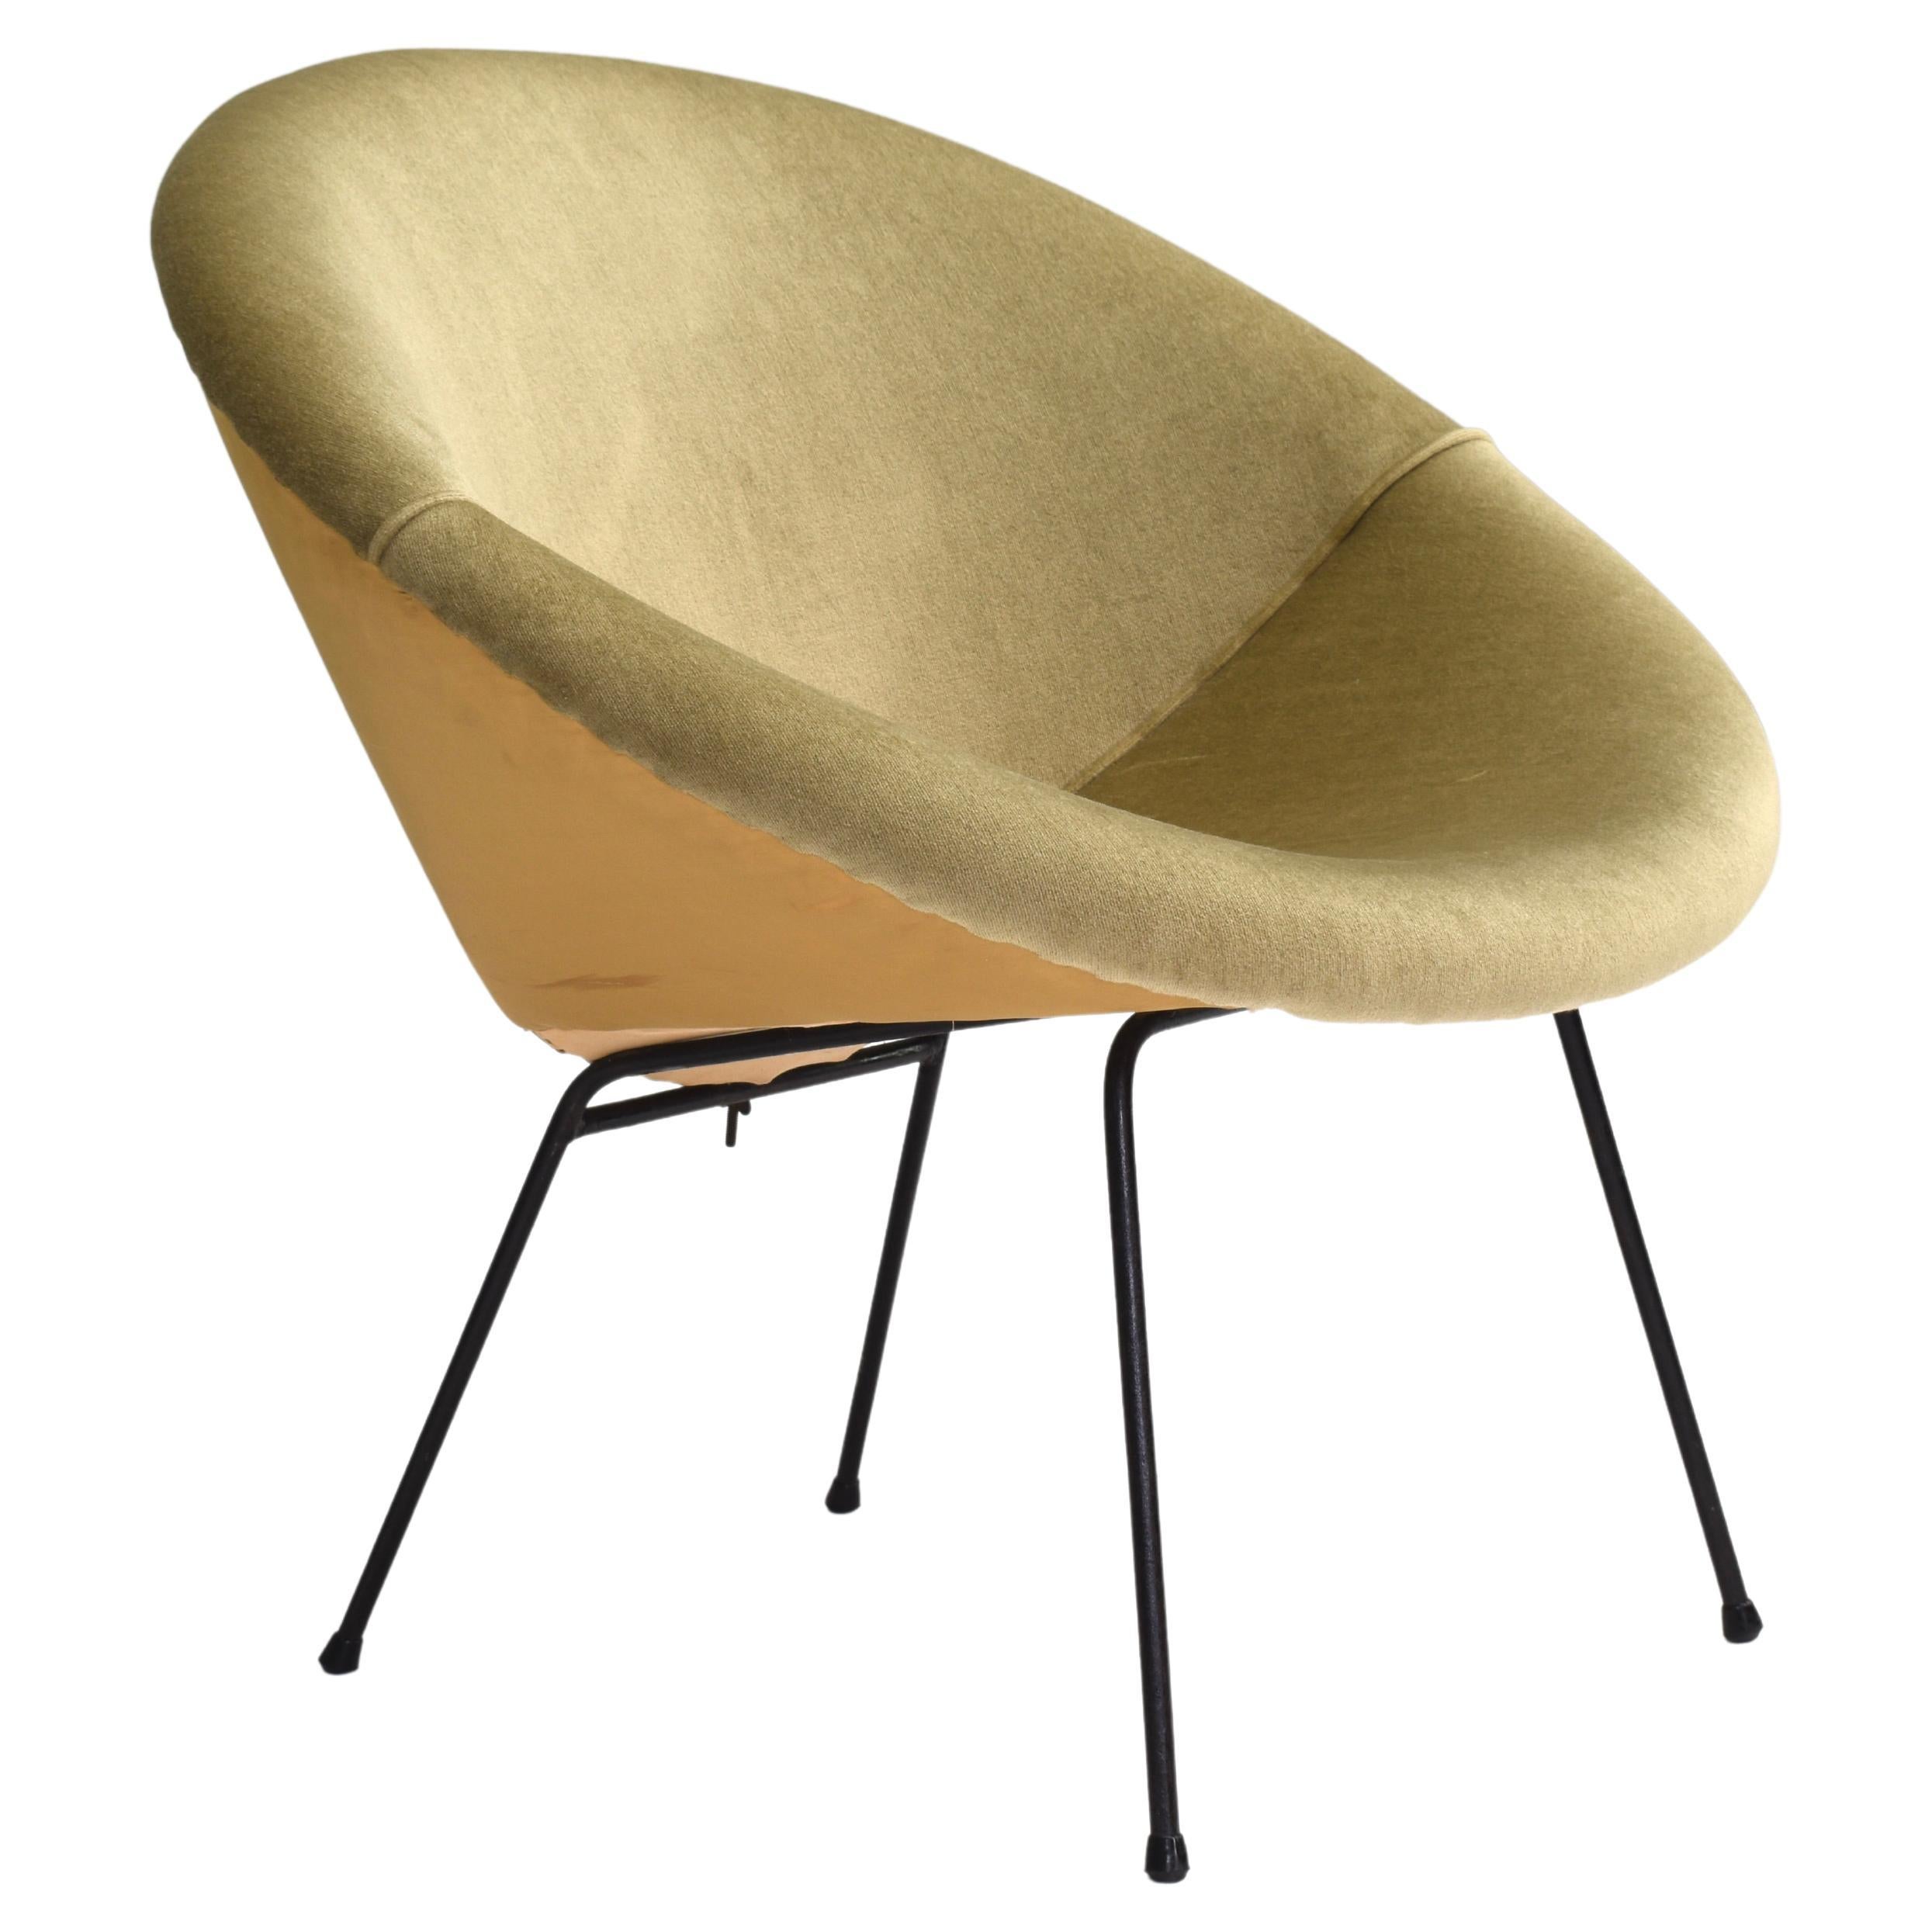 Sculptural Circle Chair in Original Mohair Velvet and Black Metal Base, 1950's For Sale